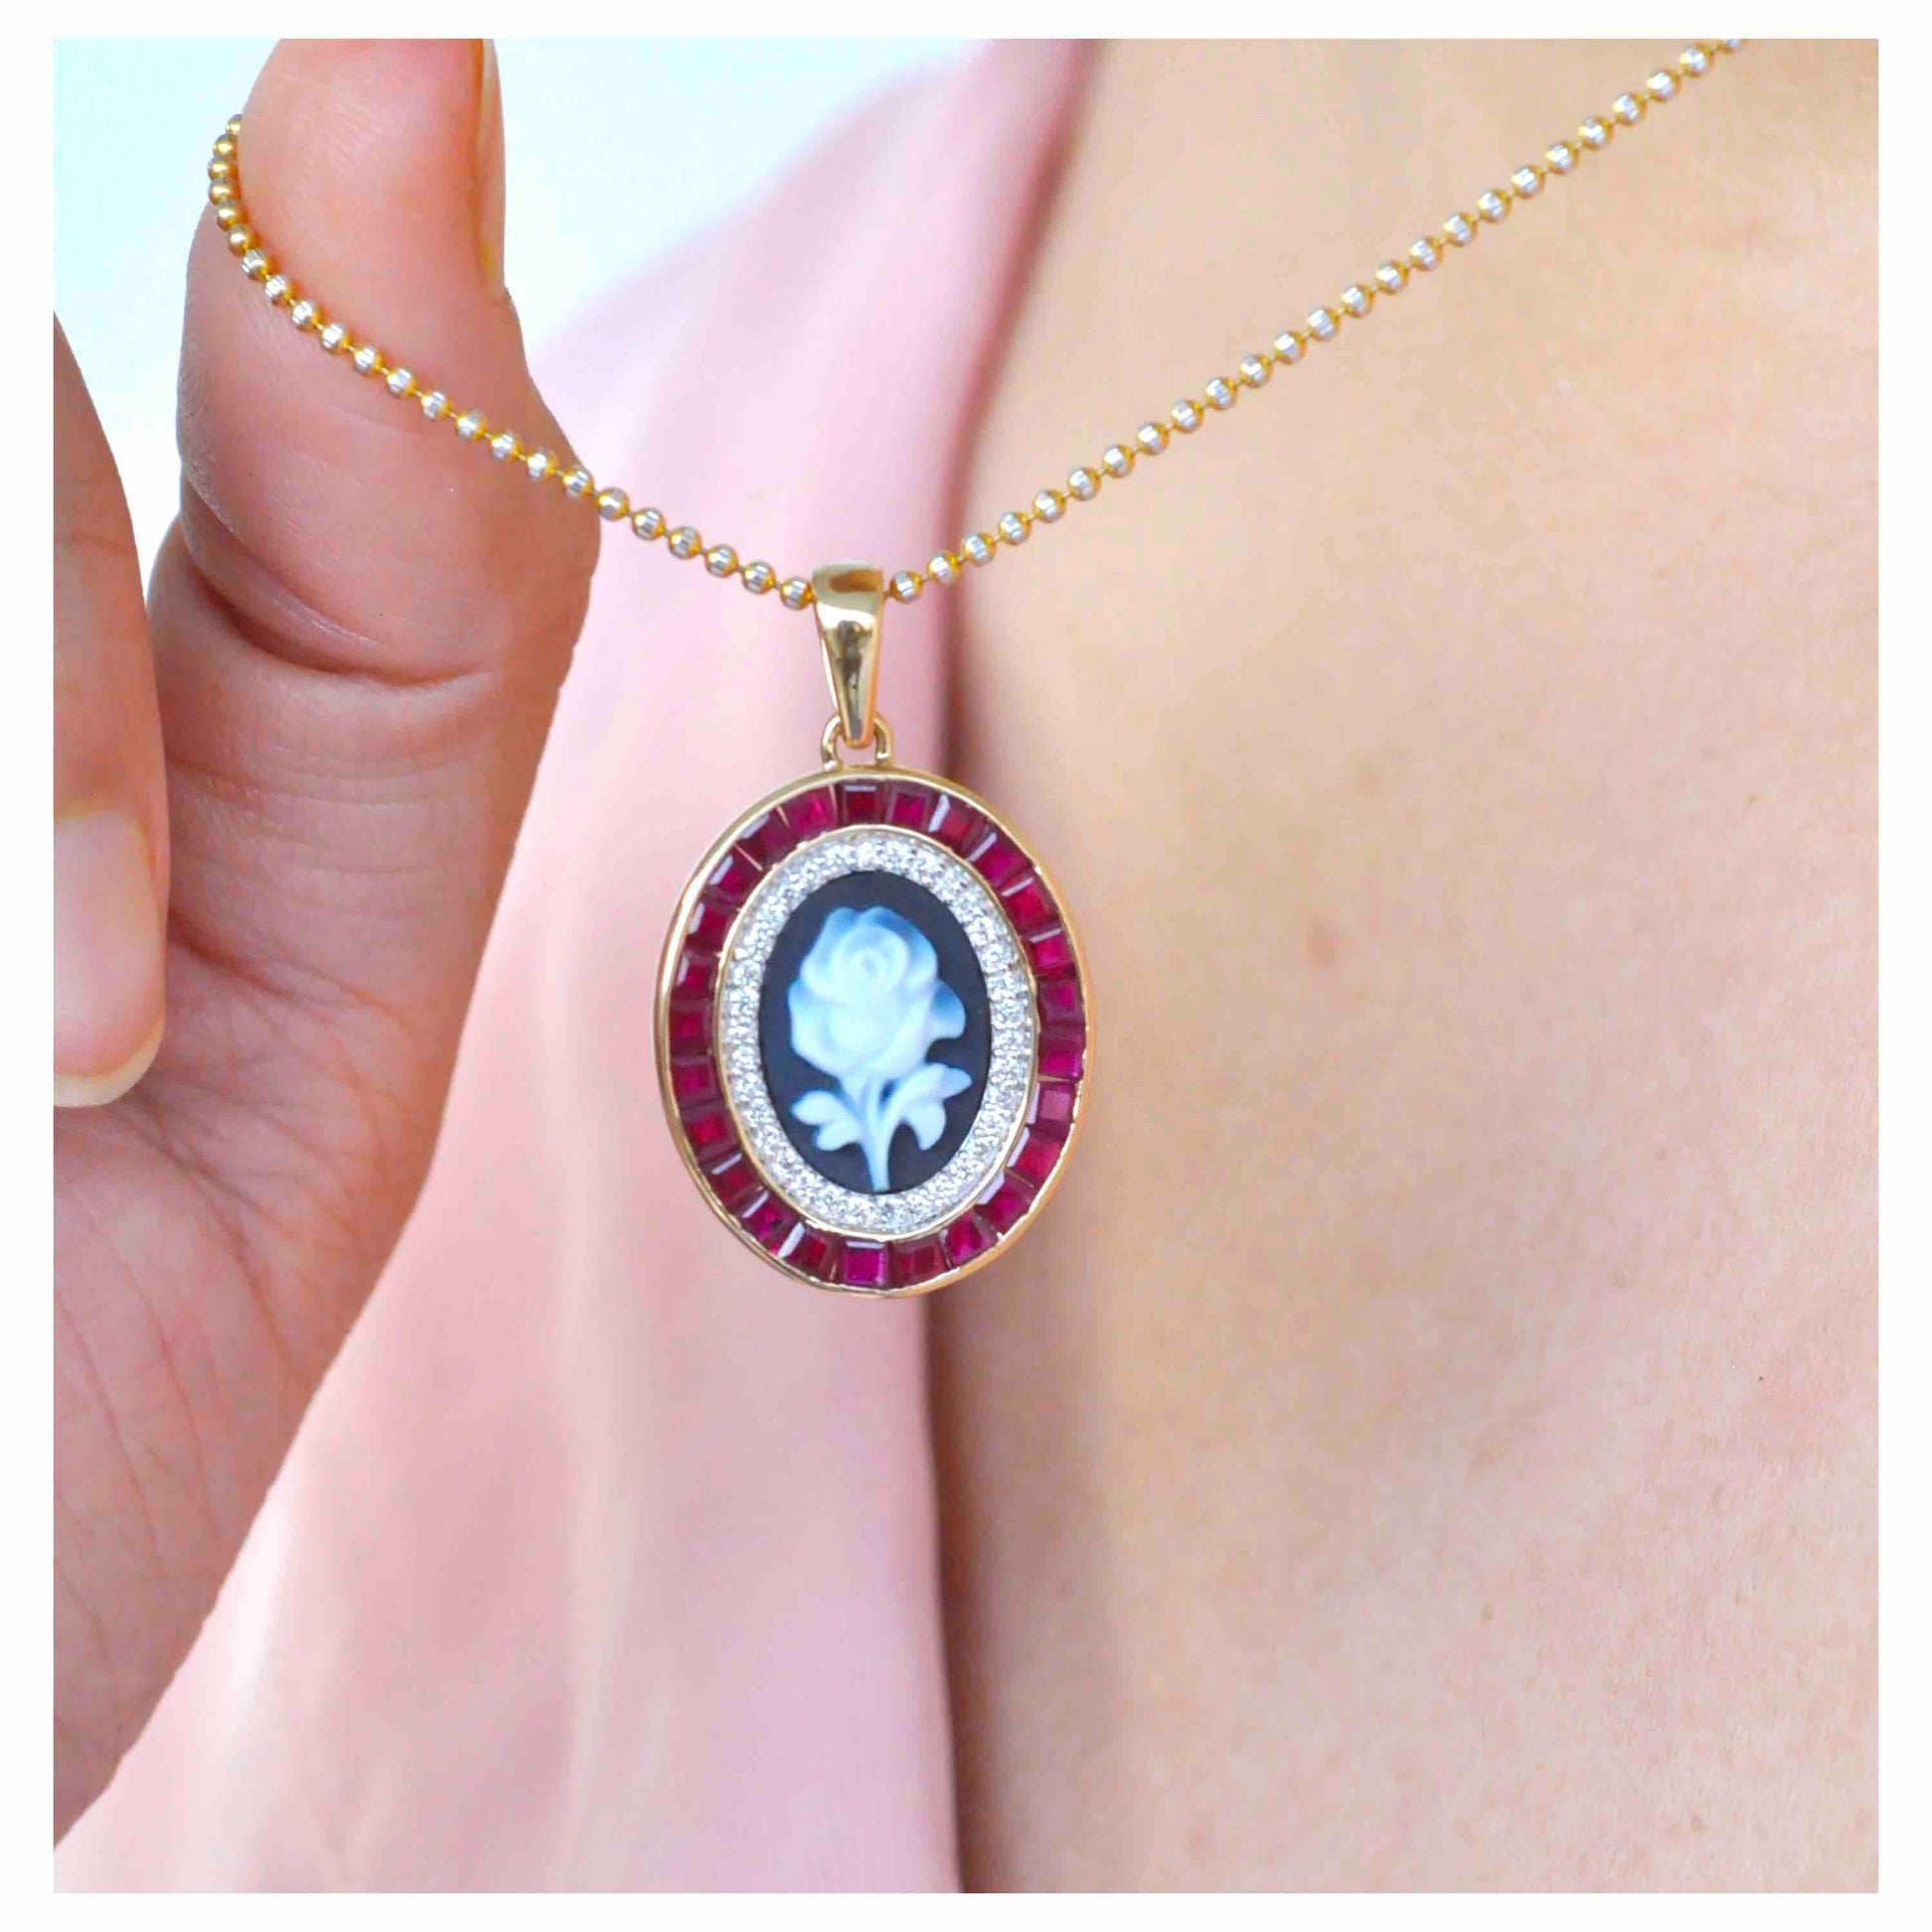 Floral cameo necklace